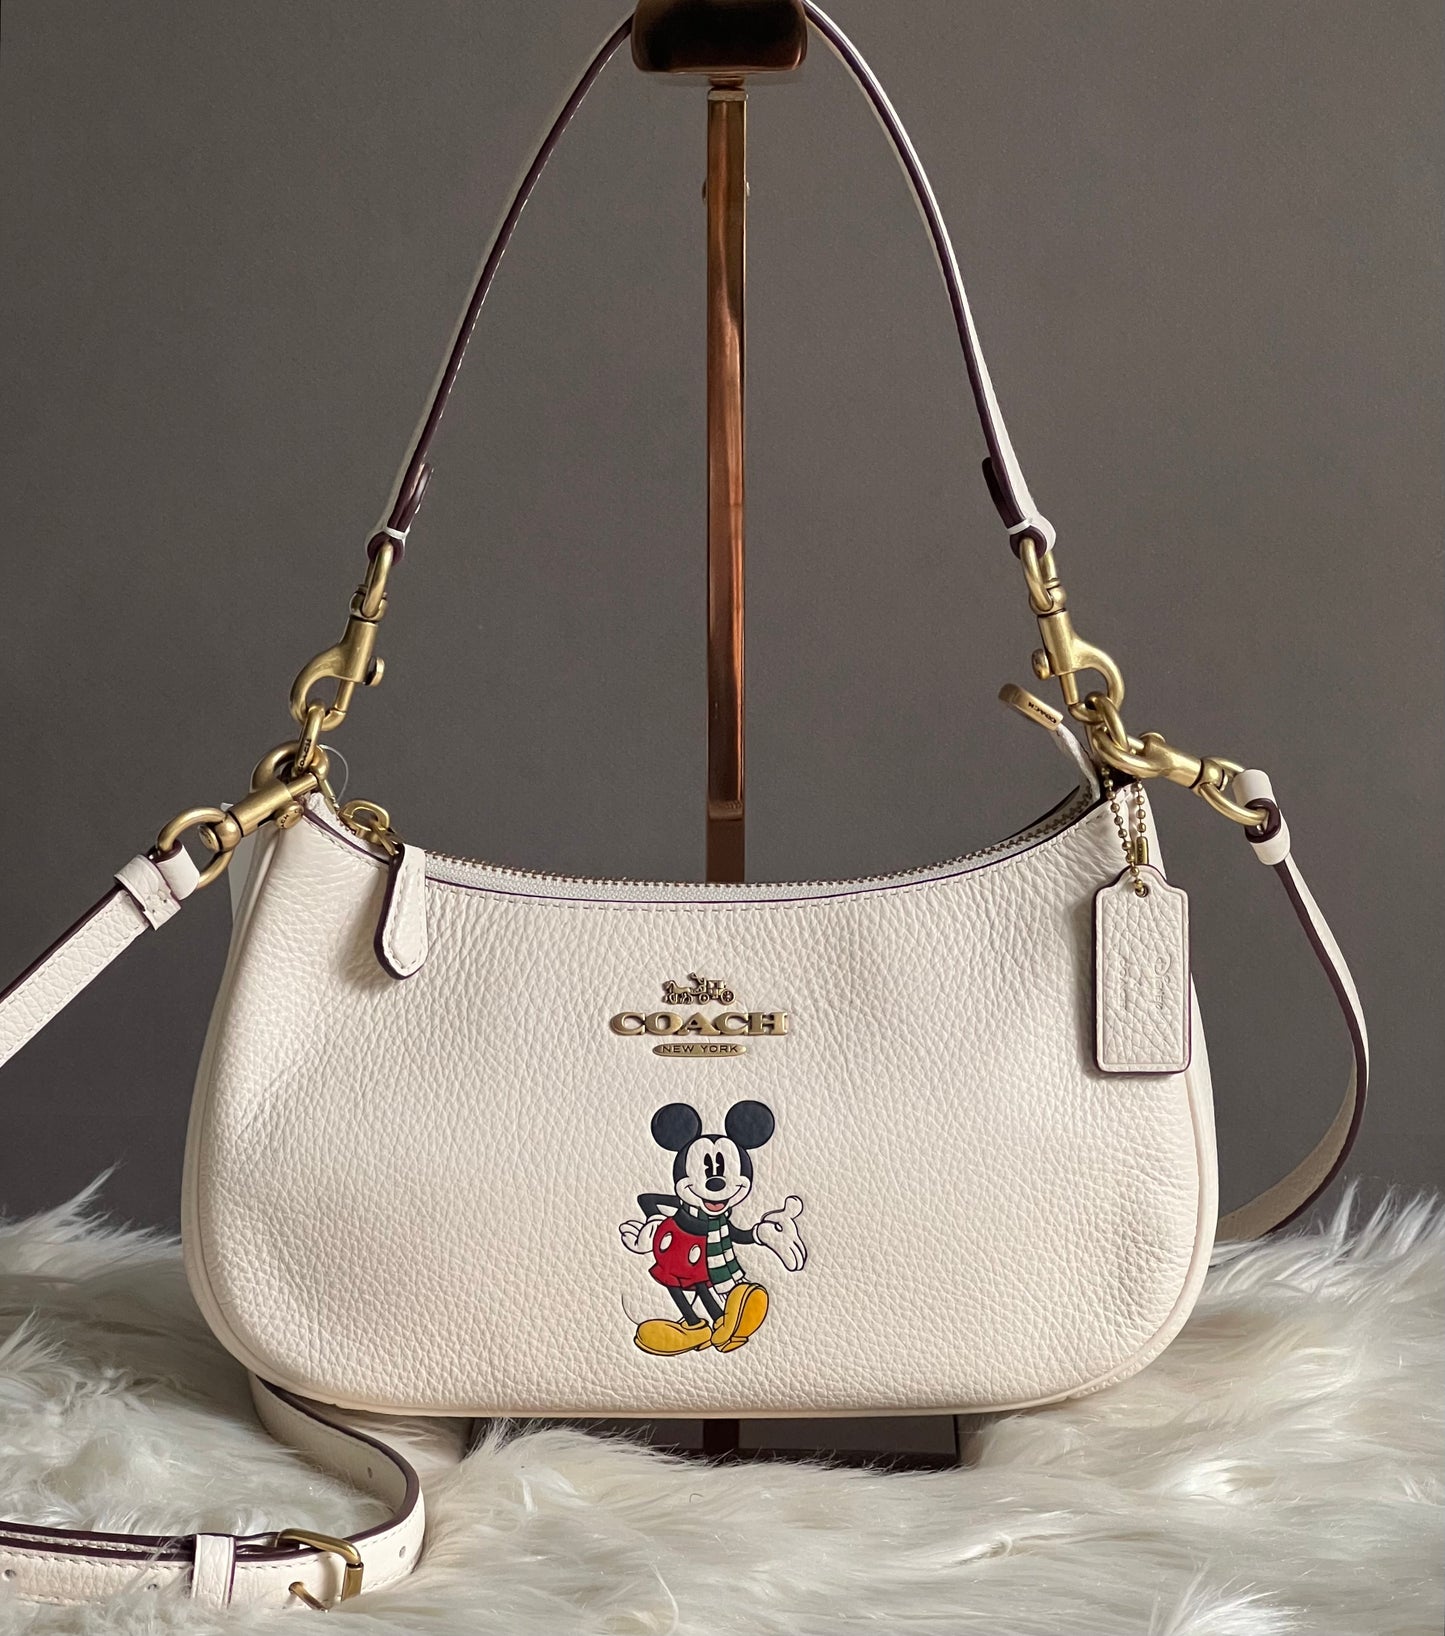 Disney X Coach Teri Shoulder Bag with Mickey Mouse